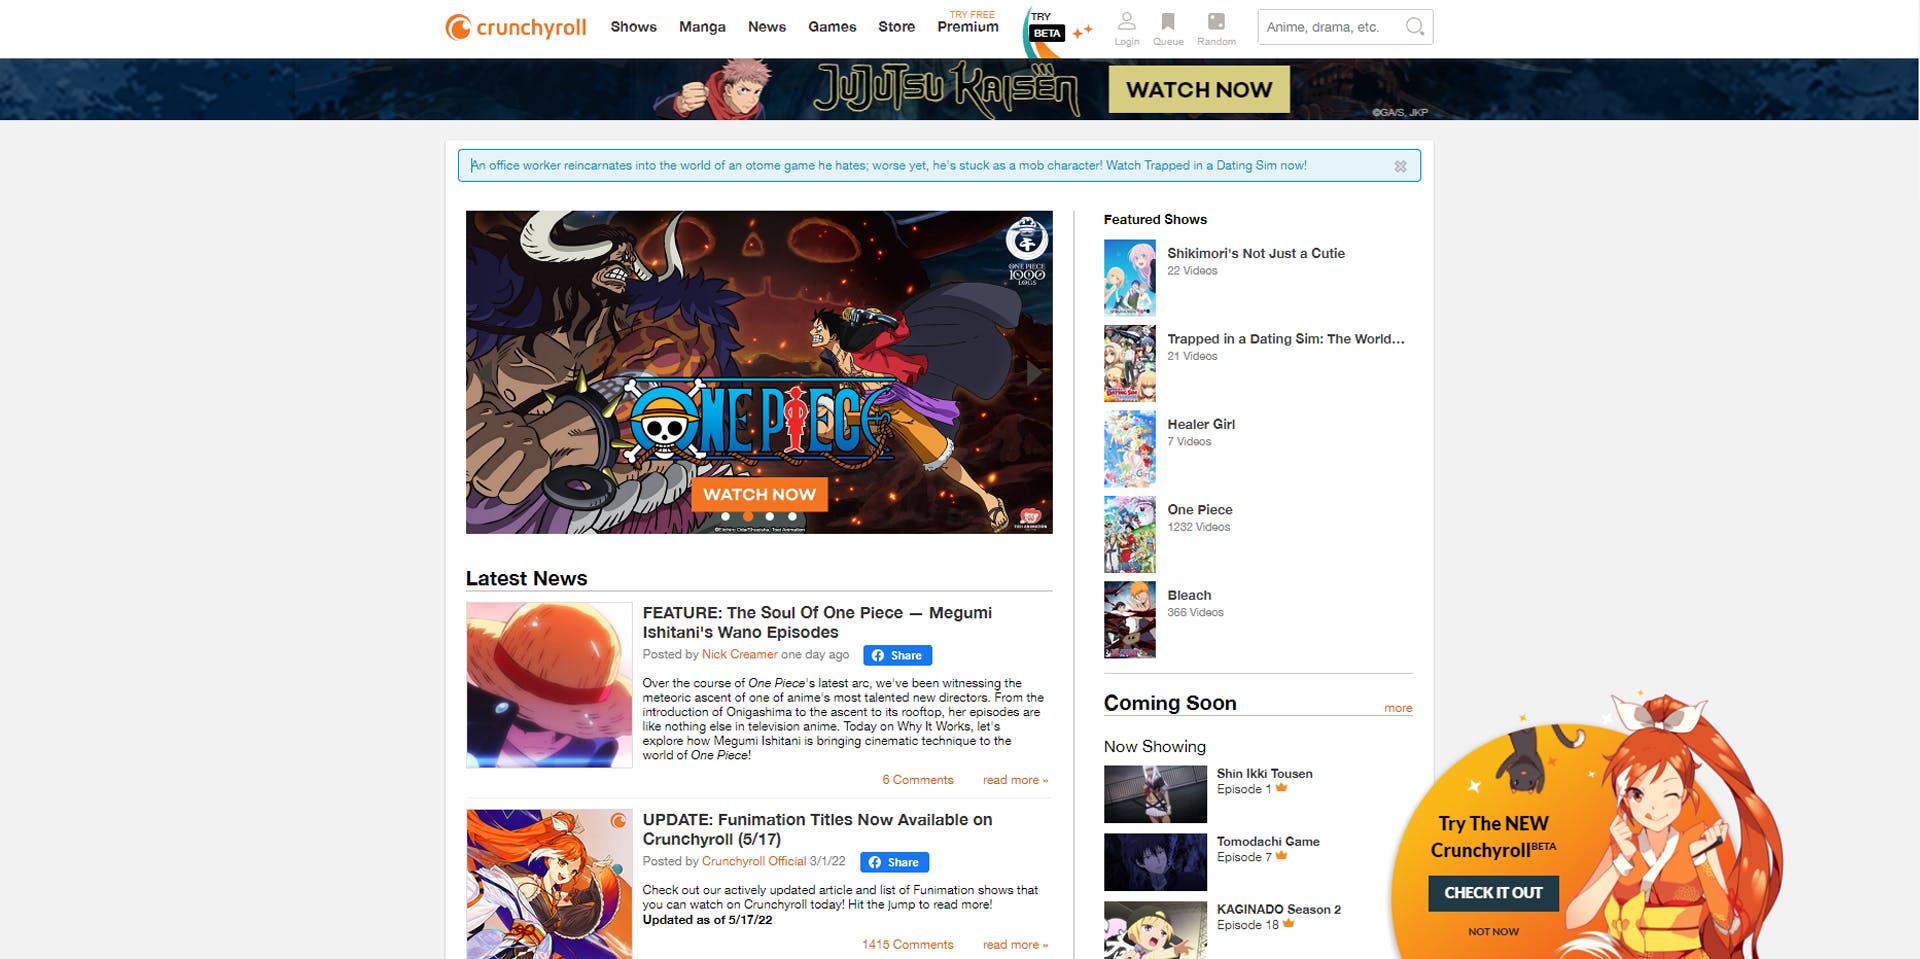 An image of the outdated look of the Crunchyroll Anime landing page